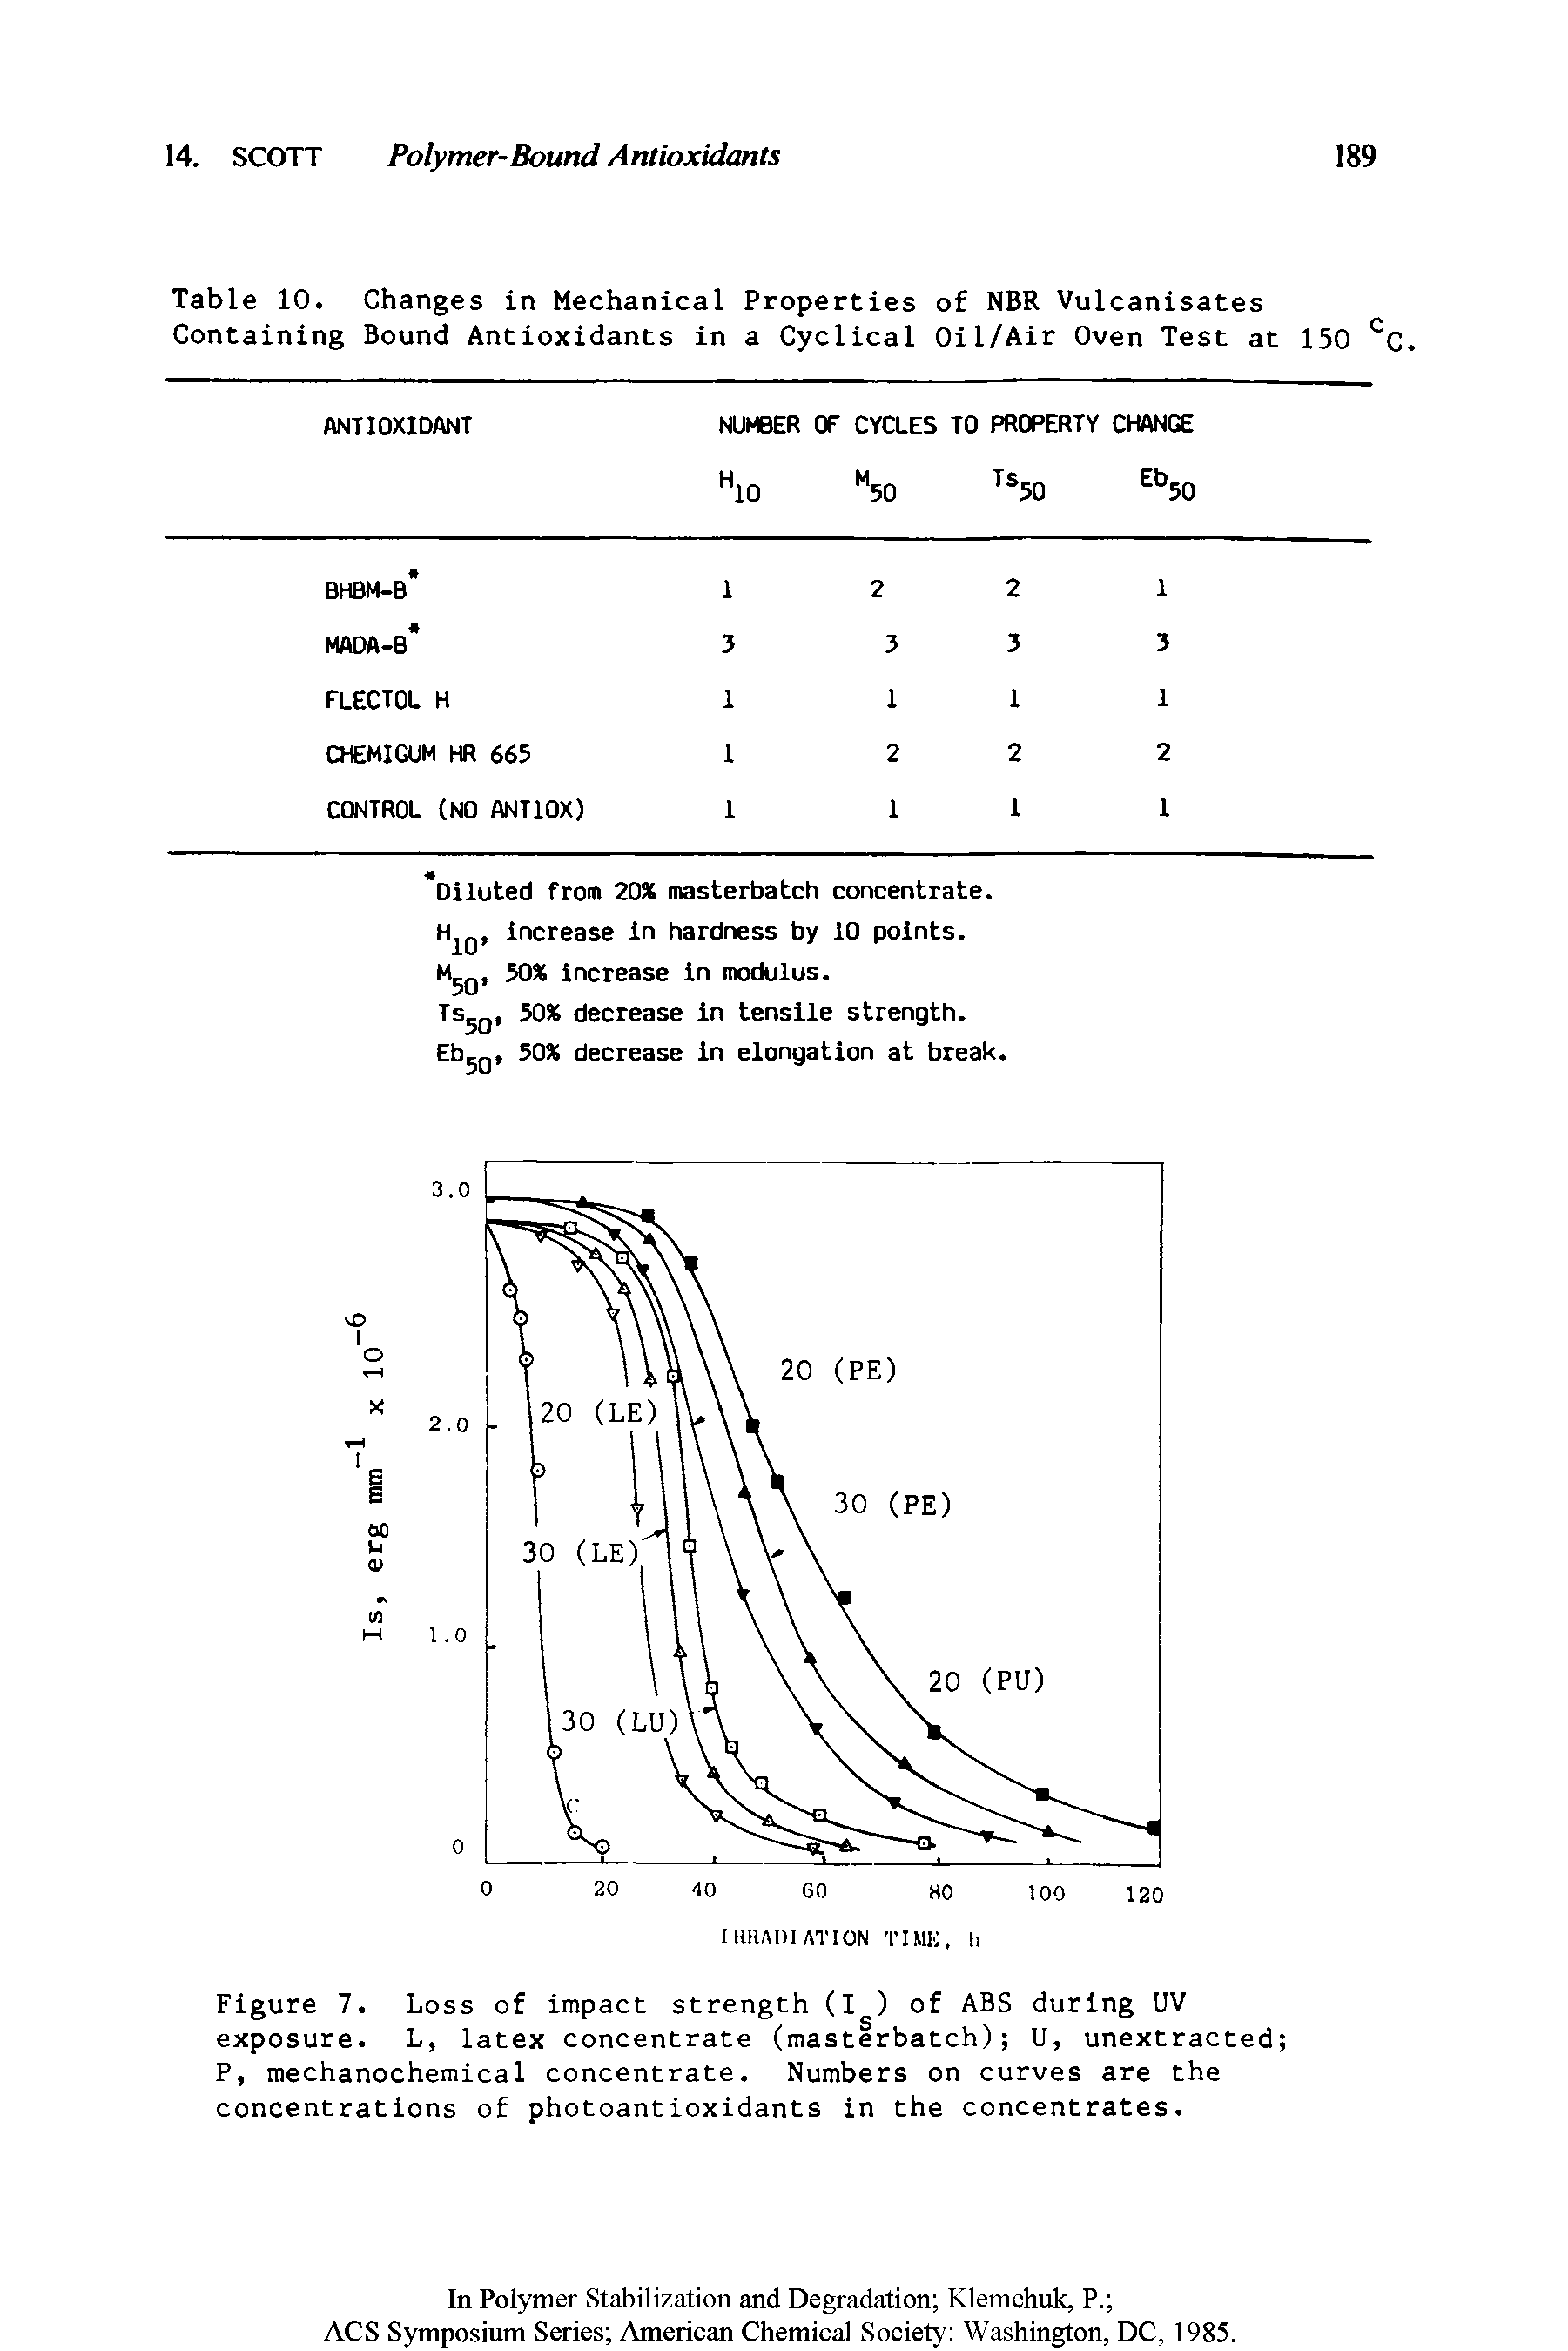 Figure 7. Loss of impact strength (I ) of ABS during UV exposure. L, latex concentrate (masterbatch) U, unextracted P, mechanochemical concentrate. Numbers on curves are the concentrations of photoantioxidants in the concentrates.